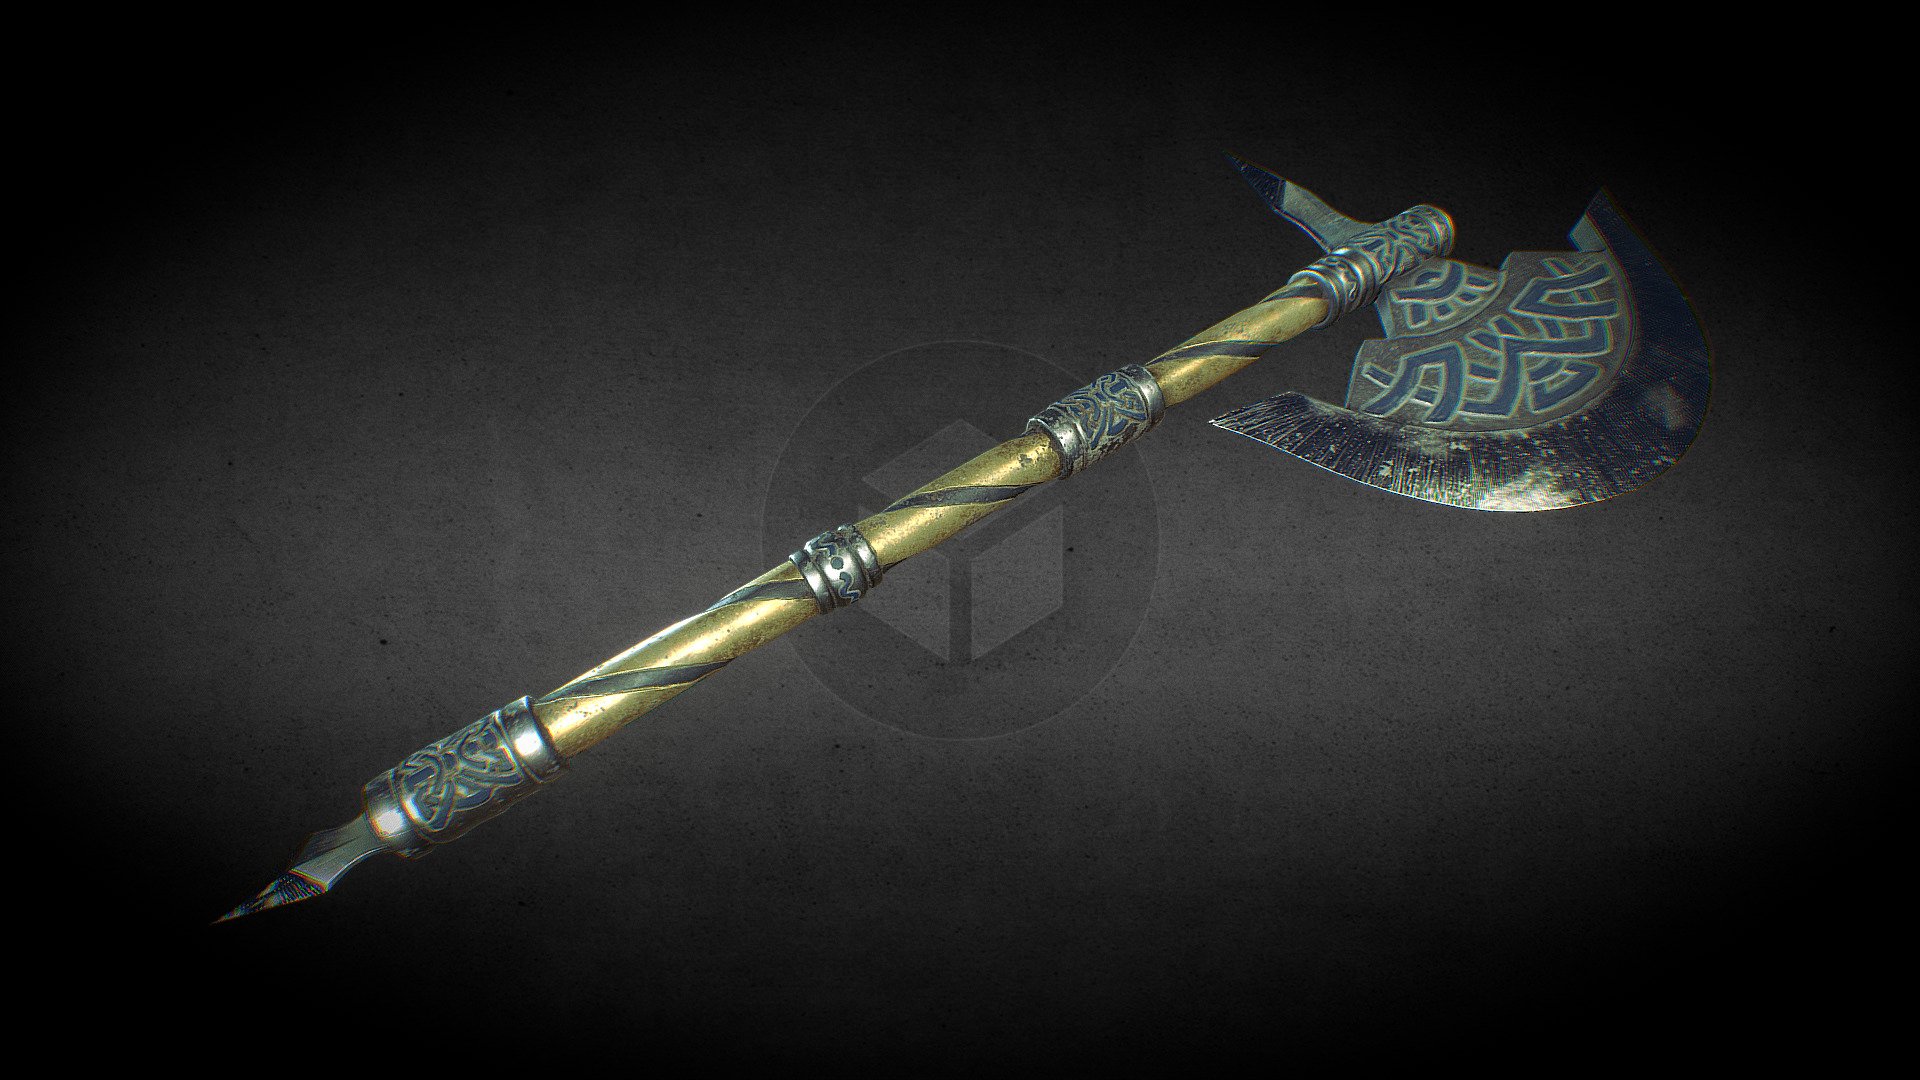 A Nordic style battle axe ready to use in any engine. Topology is designed in such a way as to be &lsquo;deformed' by your engine of choice should you choose. This is unlike &lsquo;most' hard surface &lsquo;ridgid' structures which were not designed with deforming in mind.

Full PBR maps with different spec/gloss rough/metalness any custom engine PBR can also be used through channel extraction of data. Normal maps for both Unreal 4/5 and Unity URP/HDRP/Built in shaders. Realistic surface properties textures created using latest texturing methods 3d model